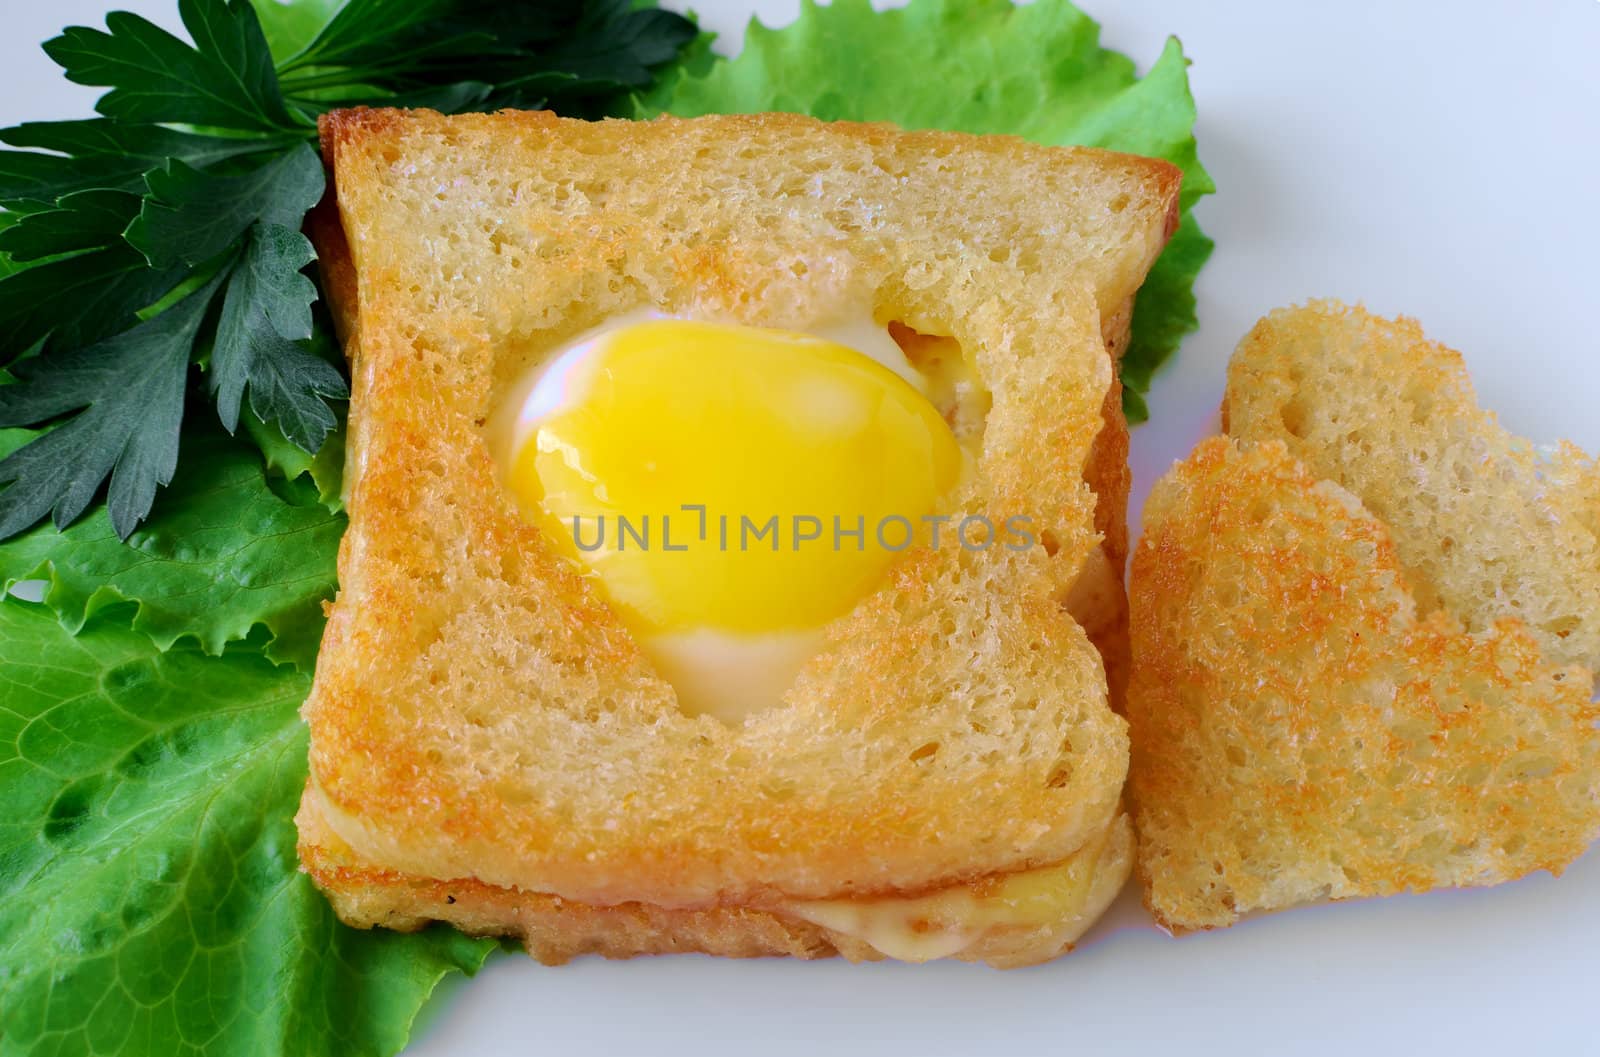 Toast with egg in the form of a heart on a platter with lettuce leaves